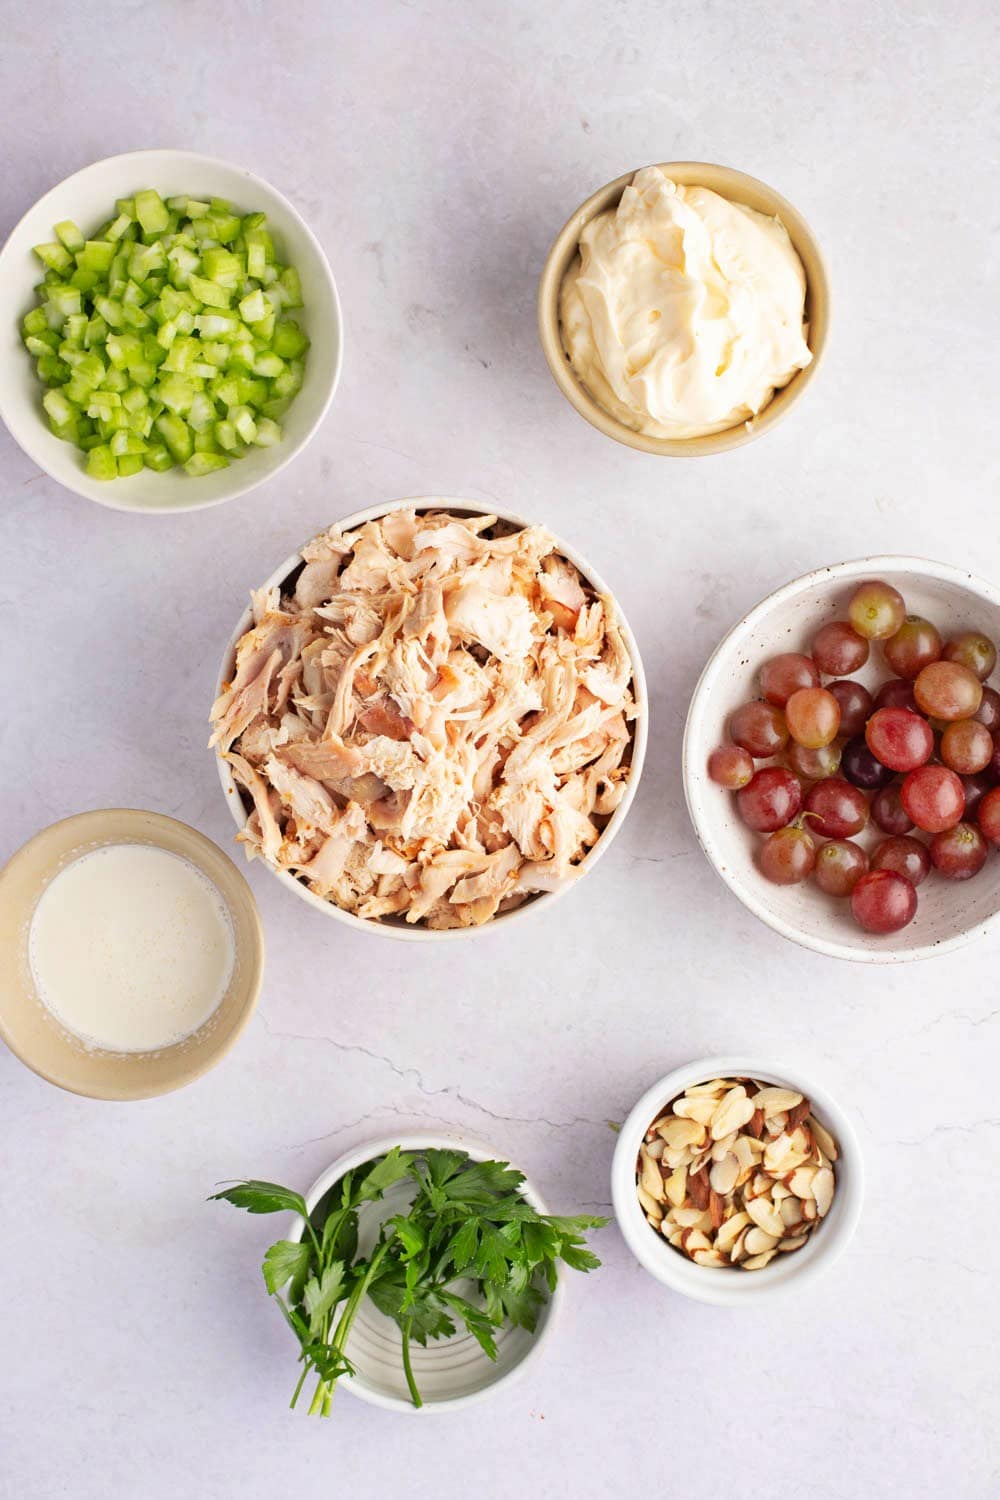 Rotisserie Chicken Ingredients - Celery, Grapes, Almonds, Parsley, Salt and Mayo